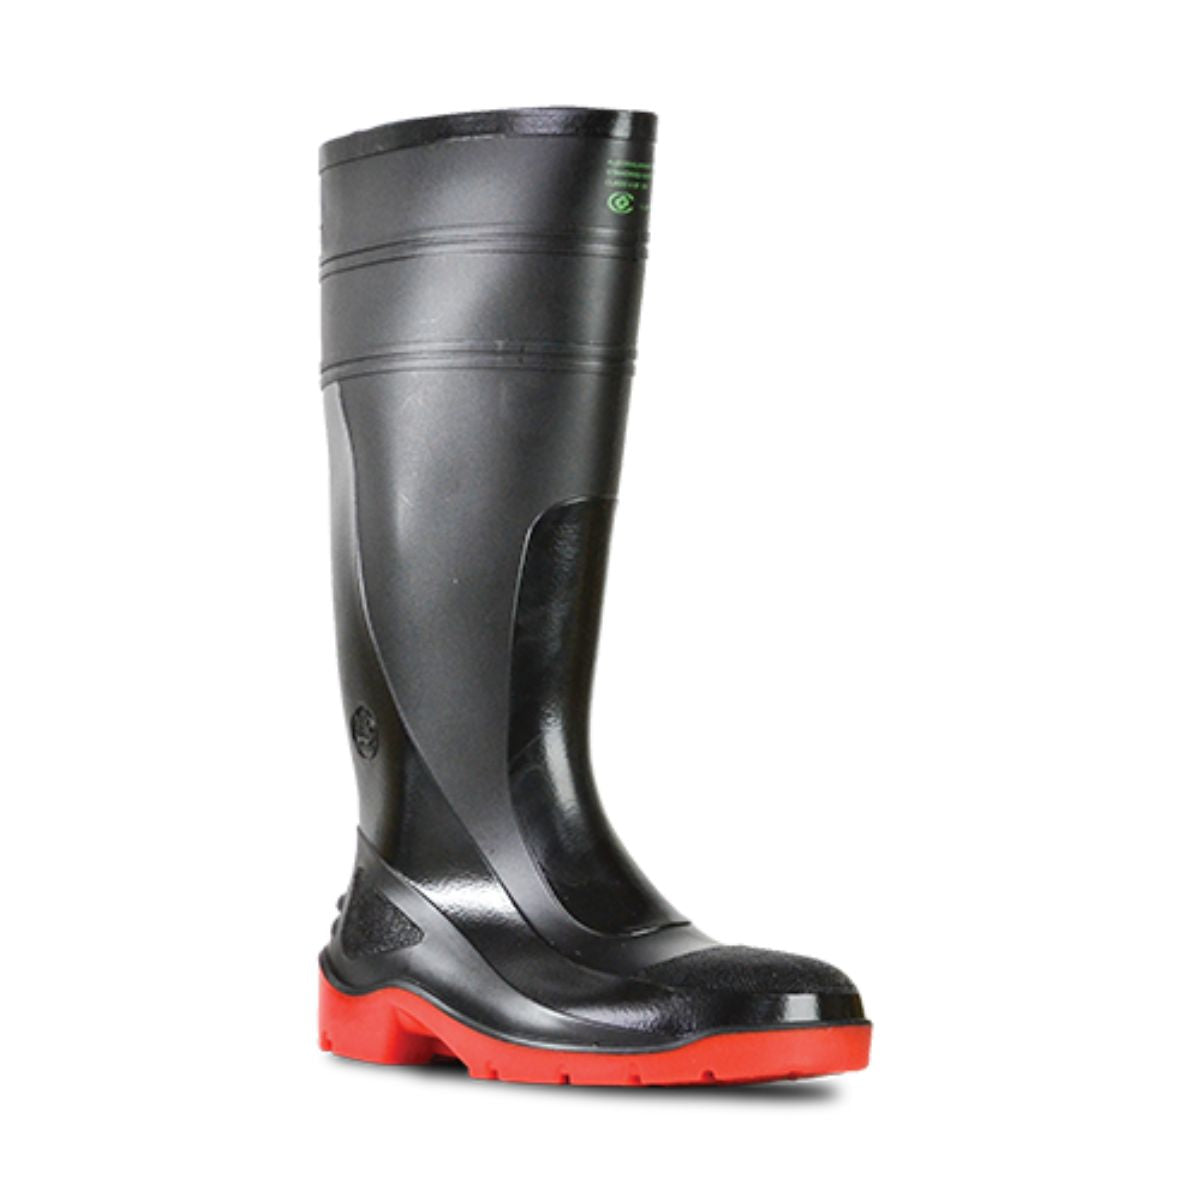 Bata Industrial Utility 400mm Safety Toe Cap Gumboots 892-65090